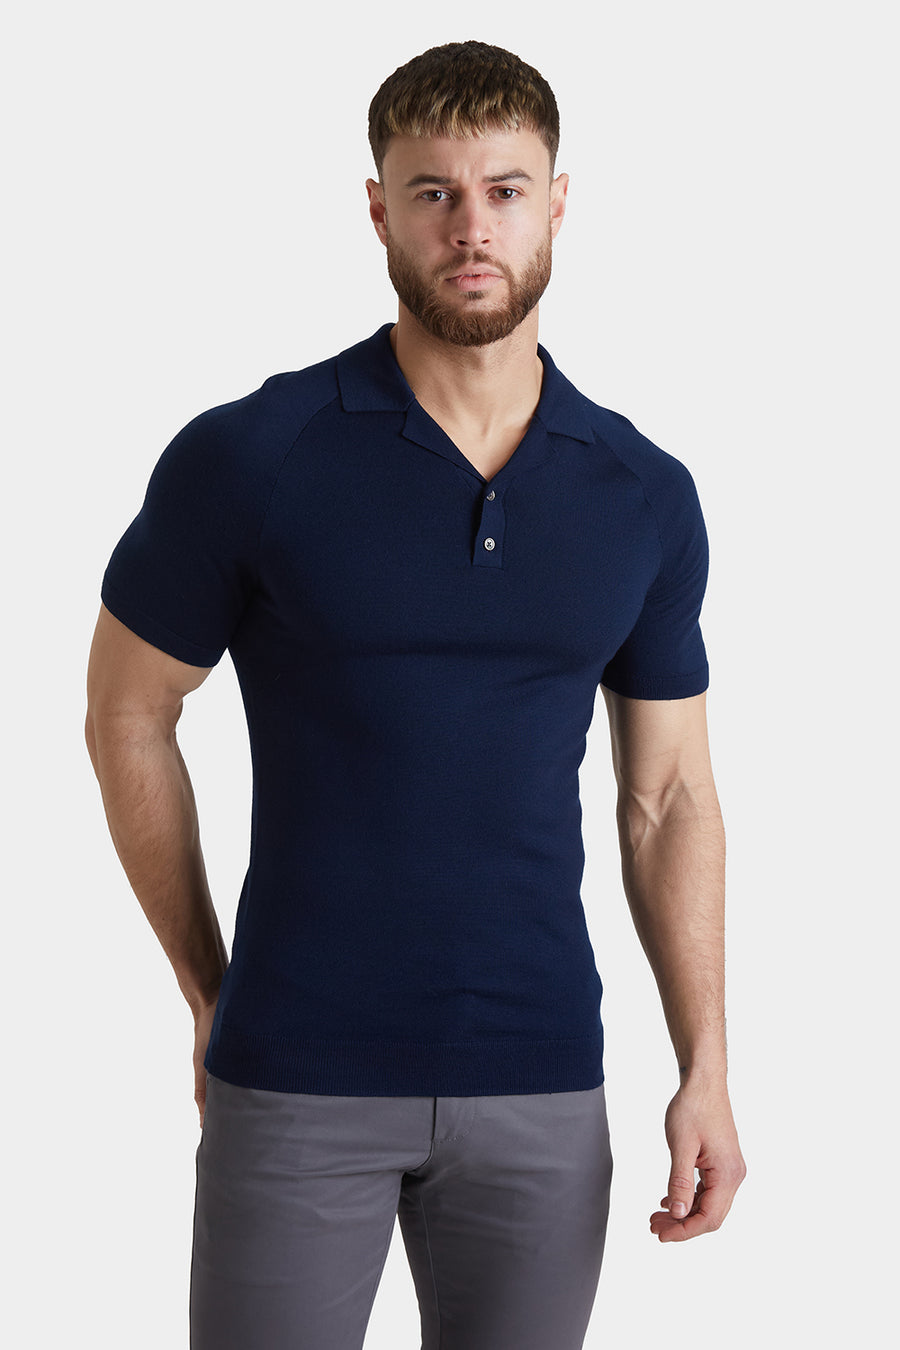 Merino Open Collar Knitted Polo in Navy - TAILORED ATHLETE - USA